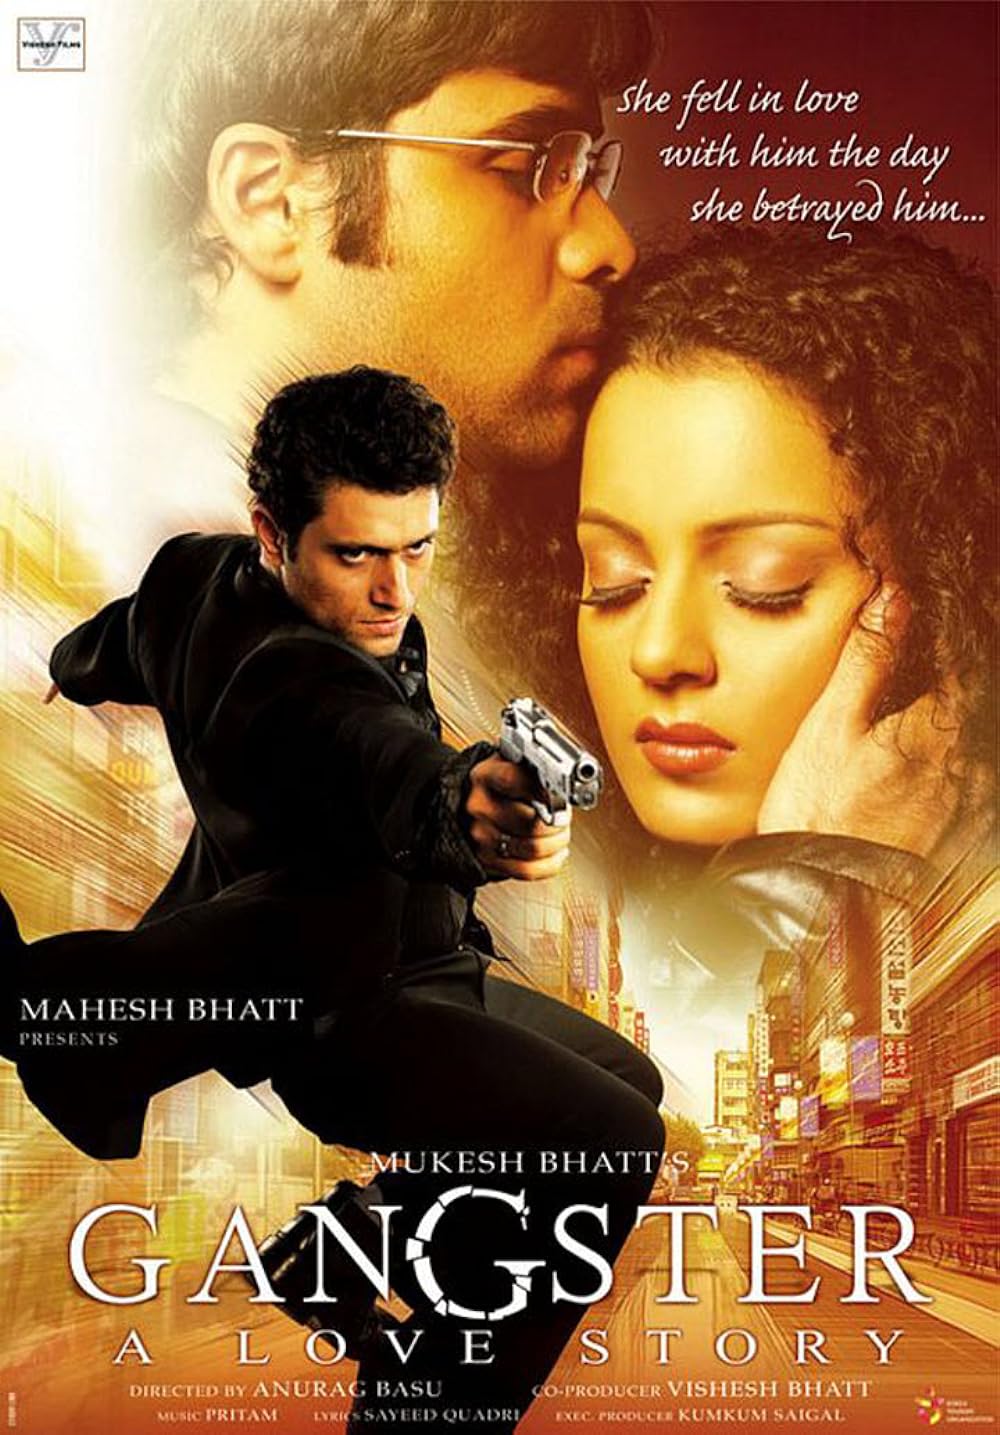 FULL MOVIE: Gangster: A Love Story (2006)